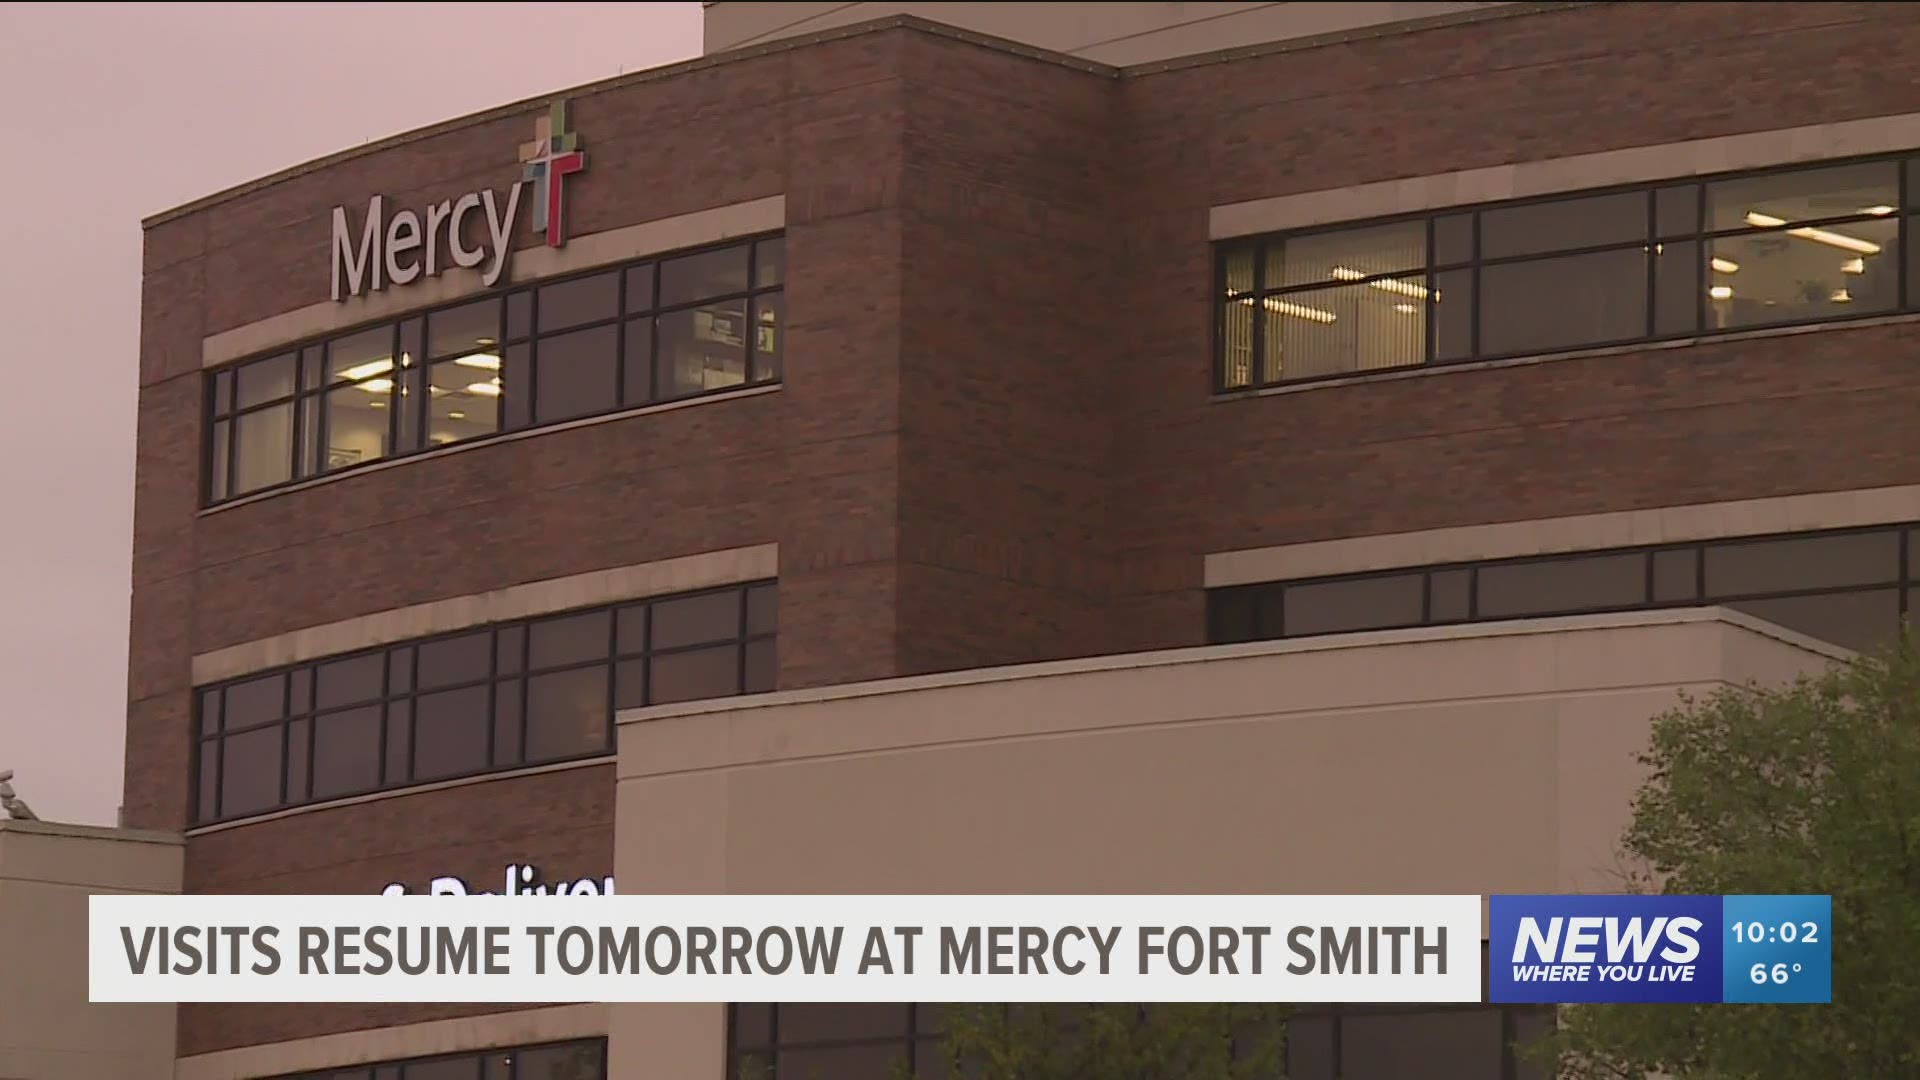 One visitor per patient, per day during a limited time will be allowed for patients hospitalized at Mercy Fort Smith and other Mercy hospitals in the area.